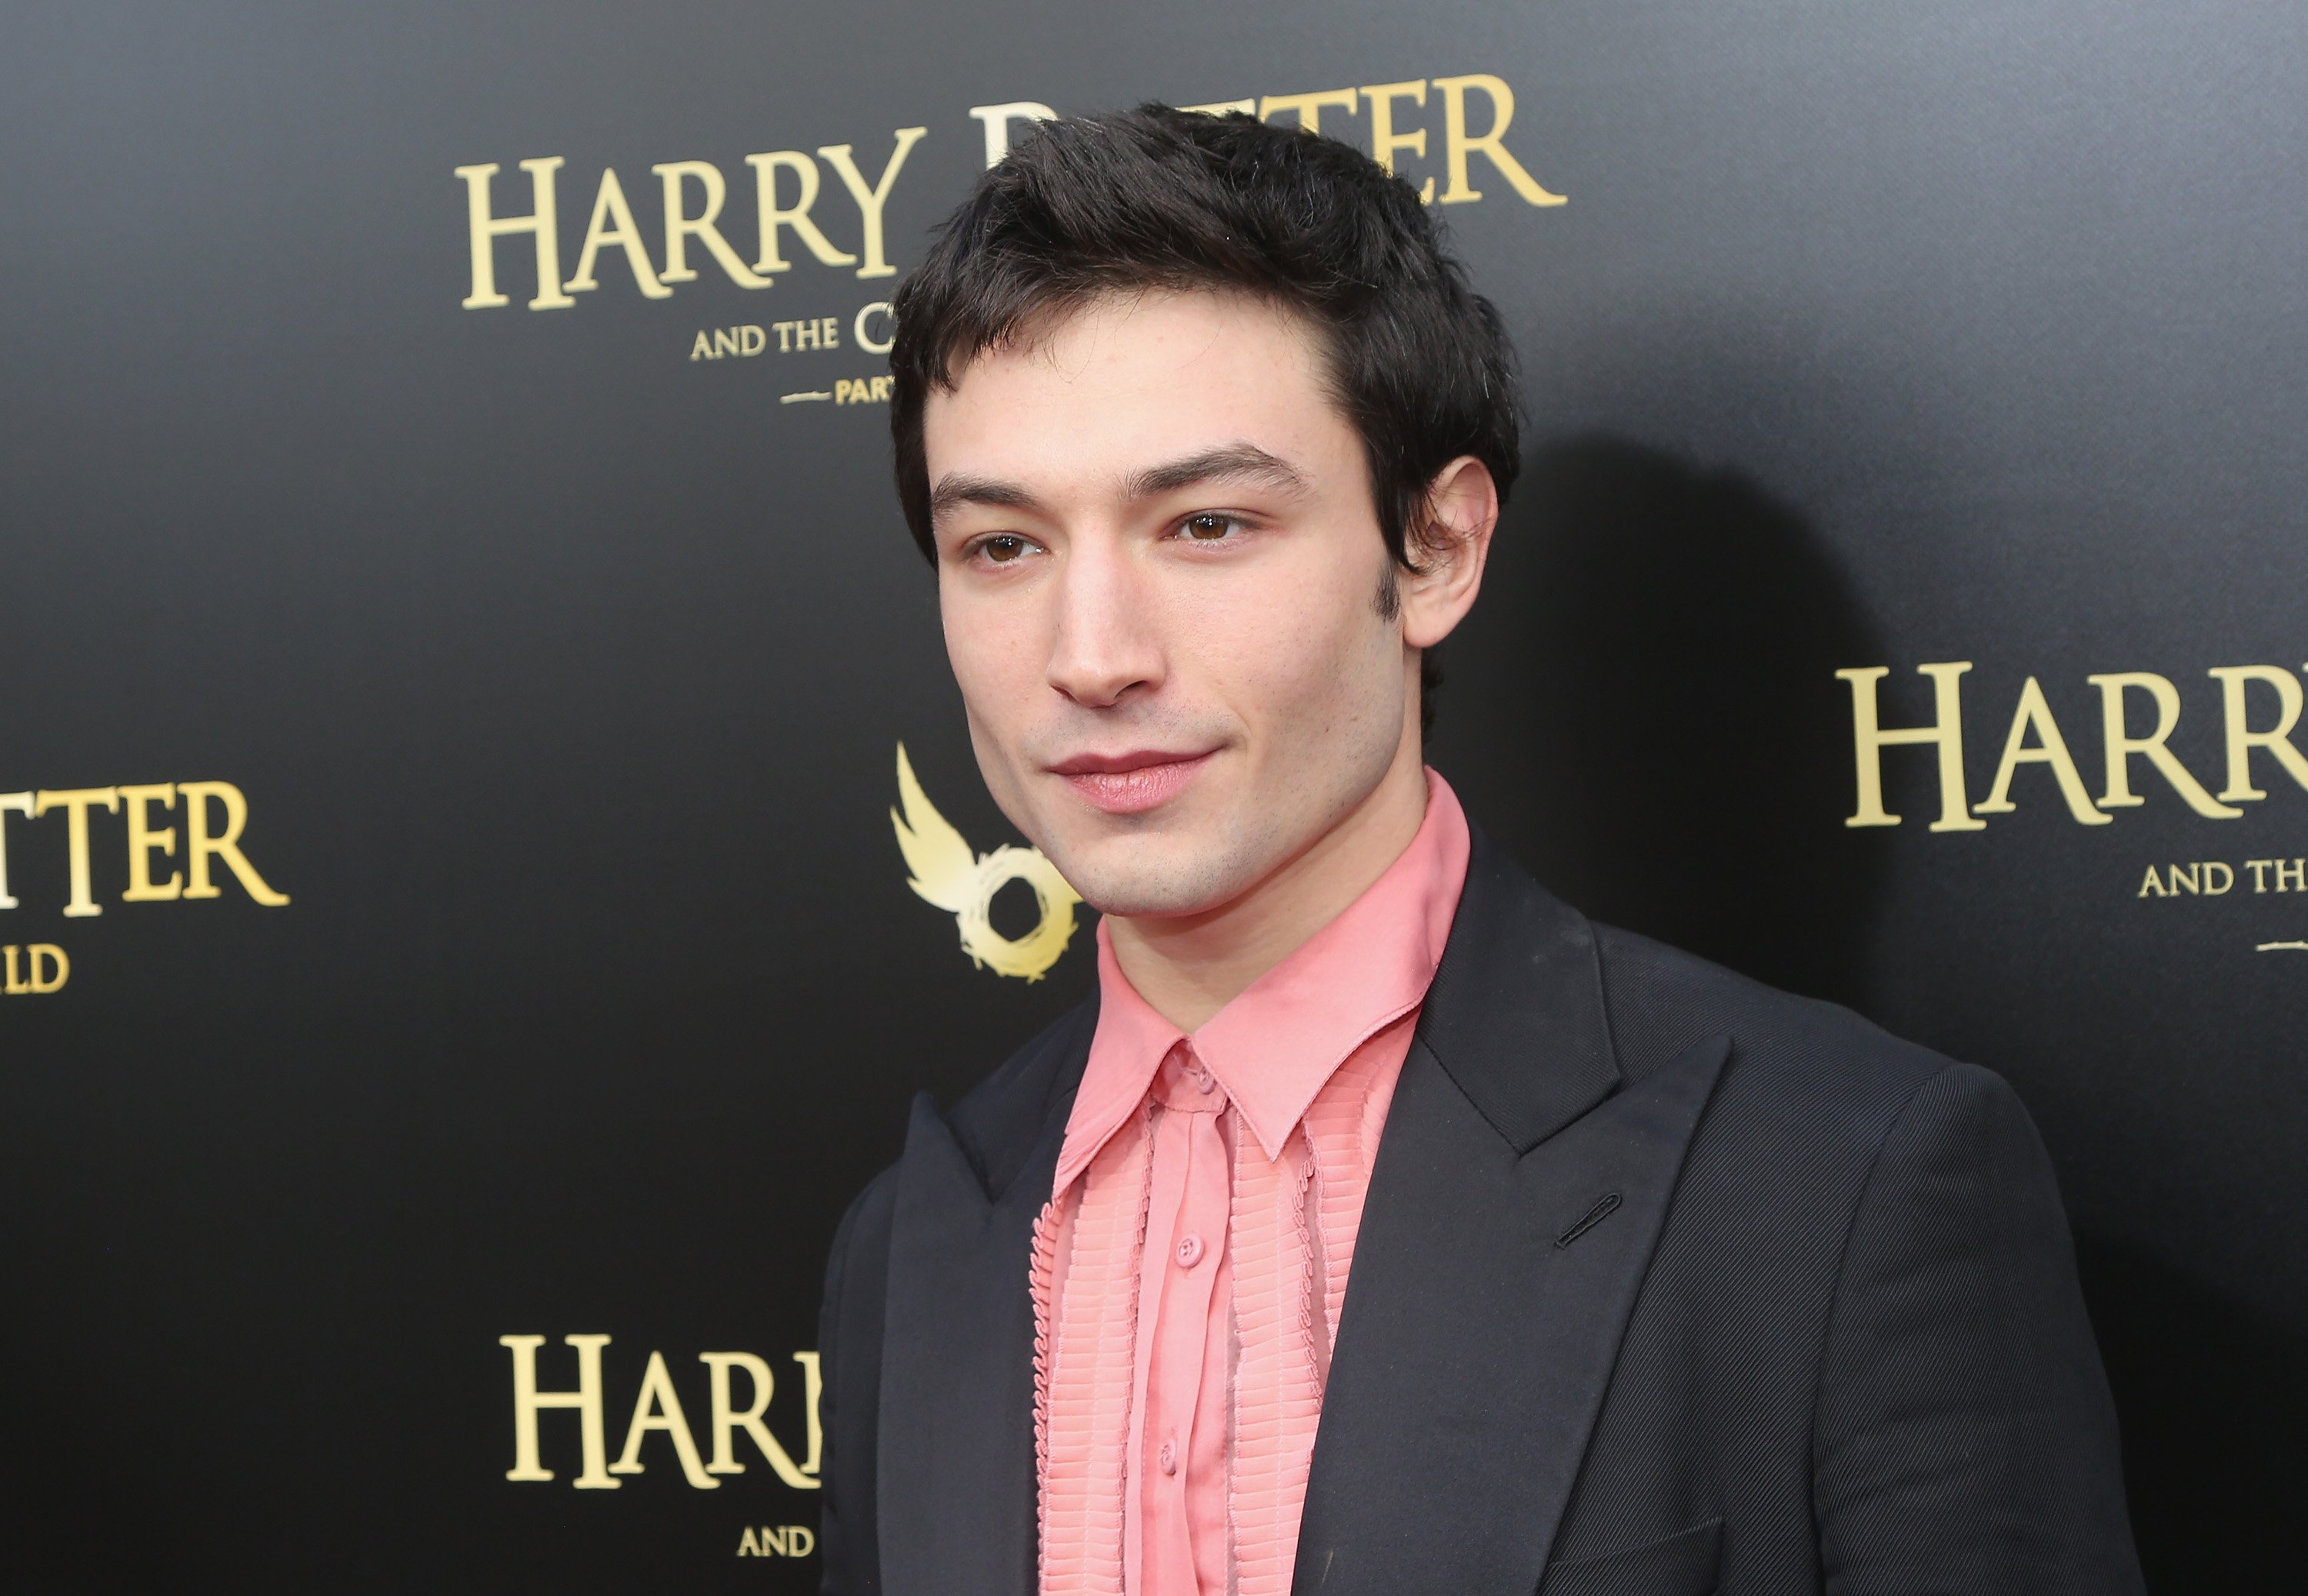 Ezra Miller at the Broadway opening night of "Harry Potter and The Cursed Child parts 1 & 2" on April 22, 2018 | Source: Getty Images